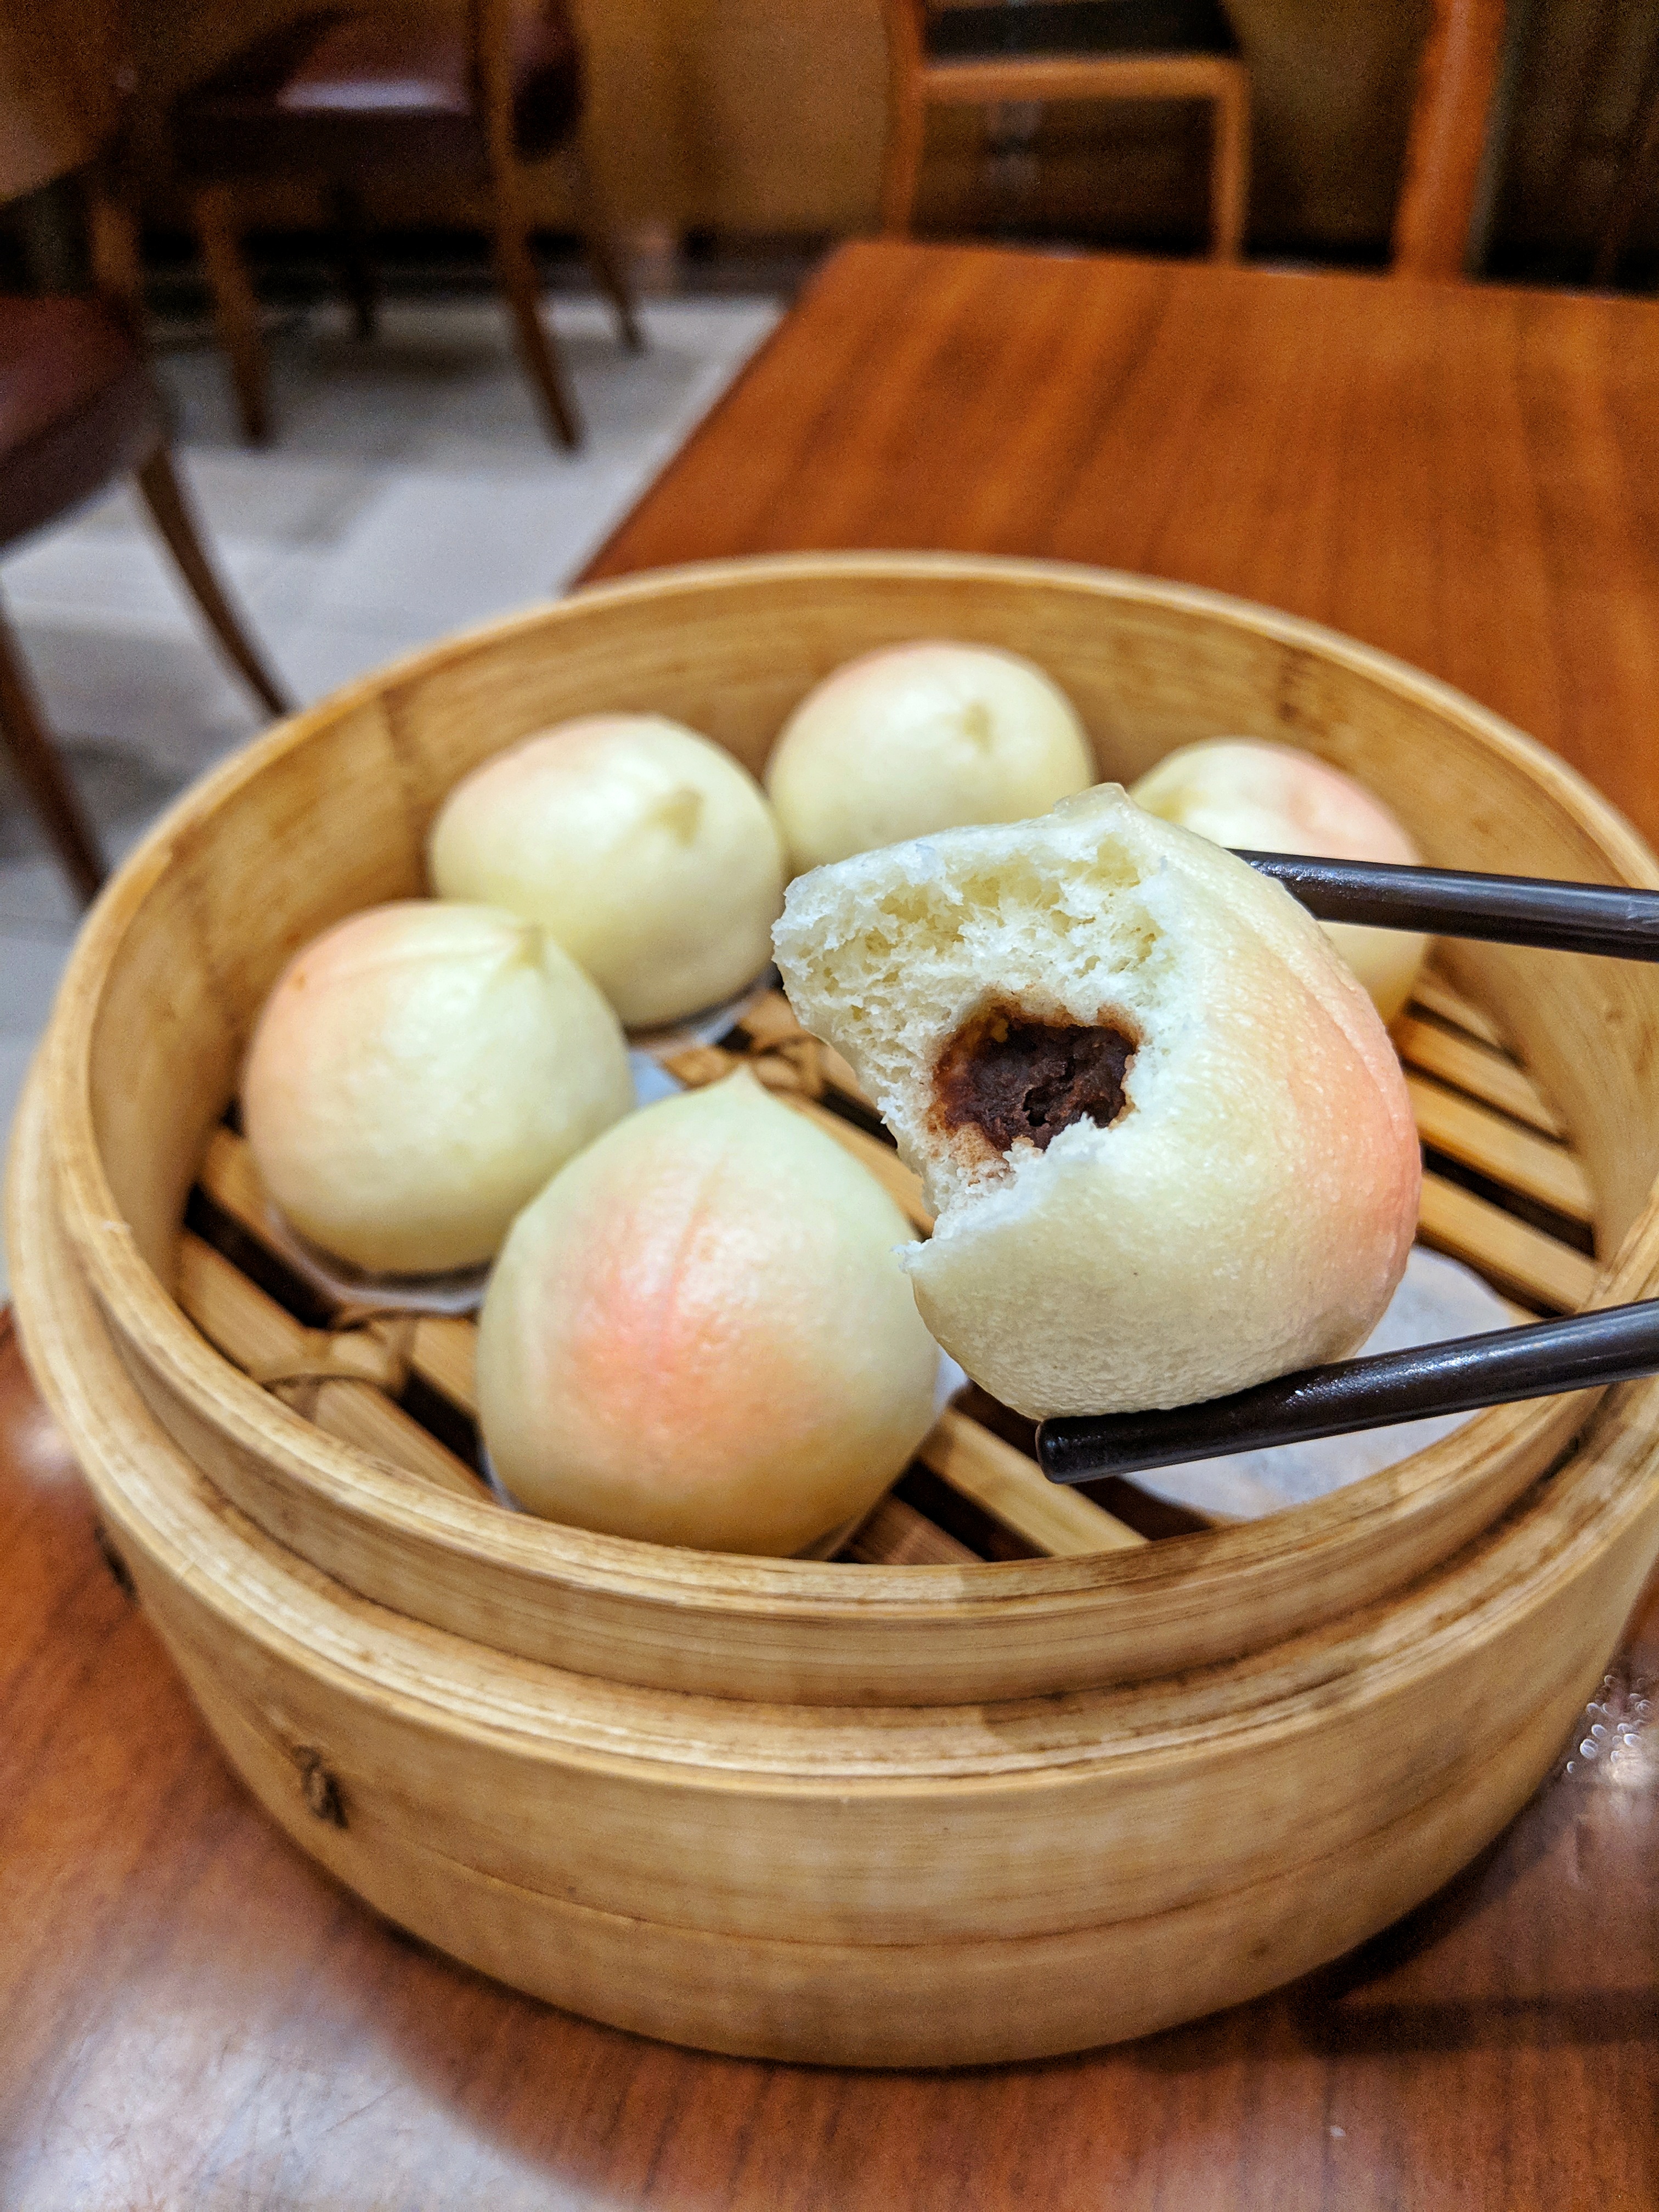 Steamed peach buns filled with red bean pasta from Din Tai Fung in Hong Kong